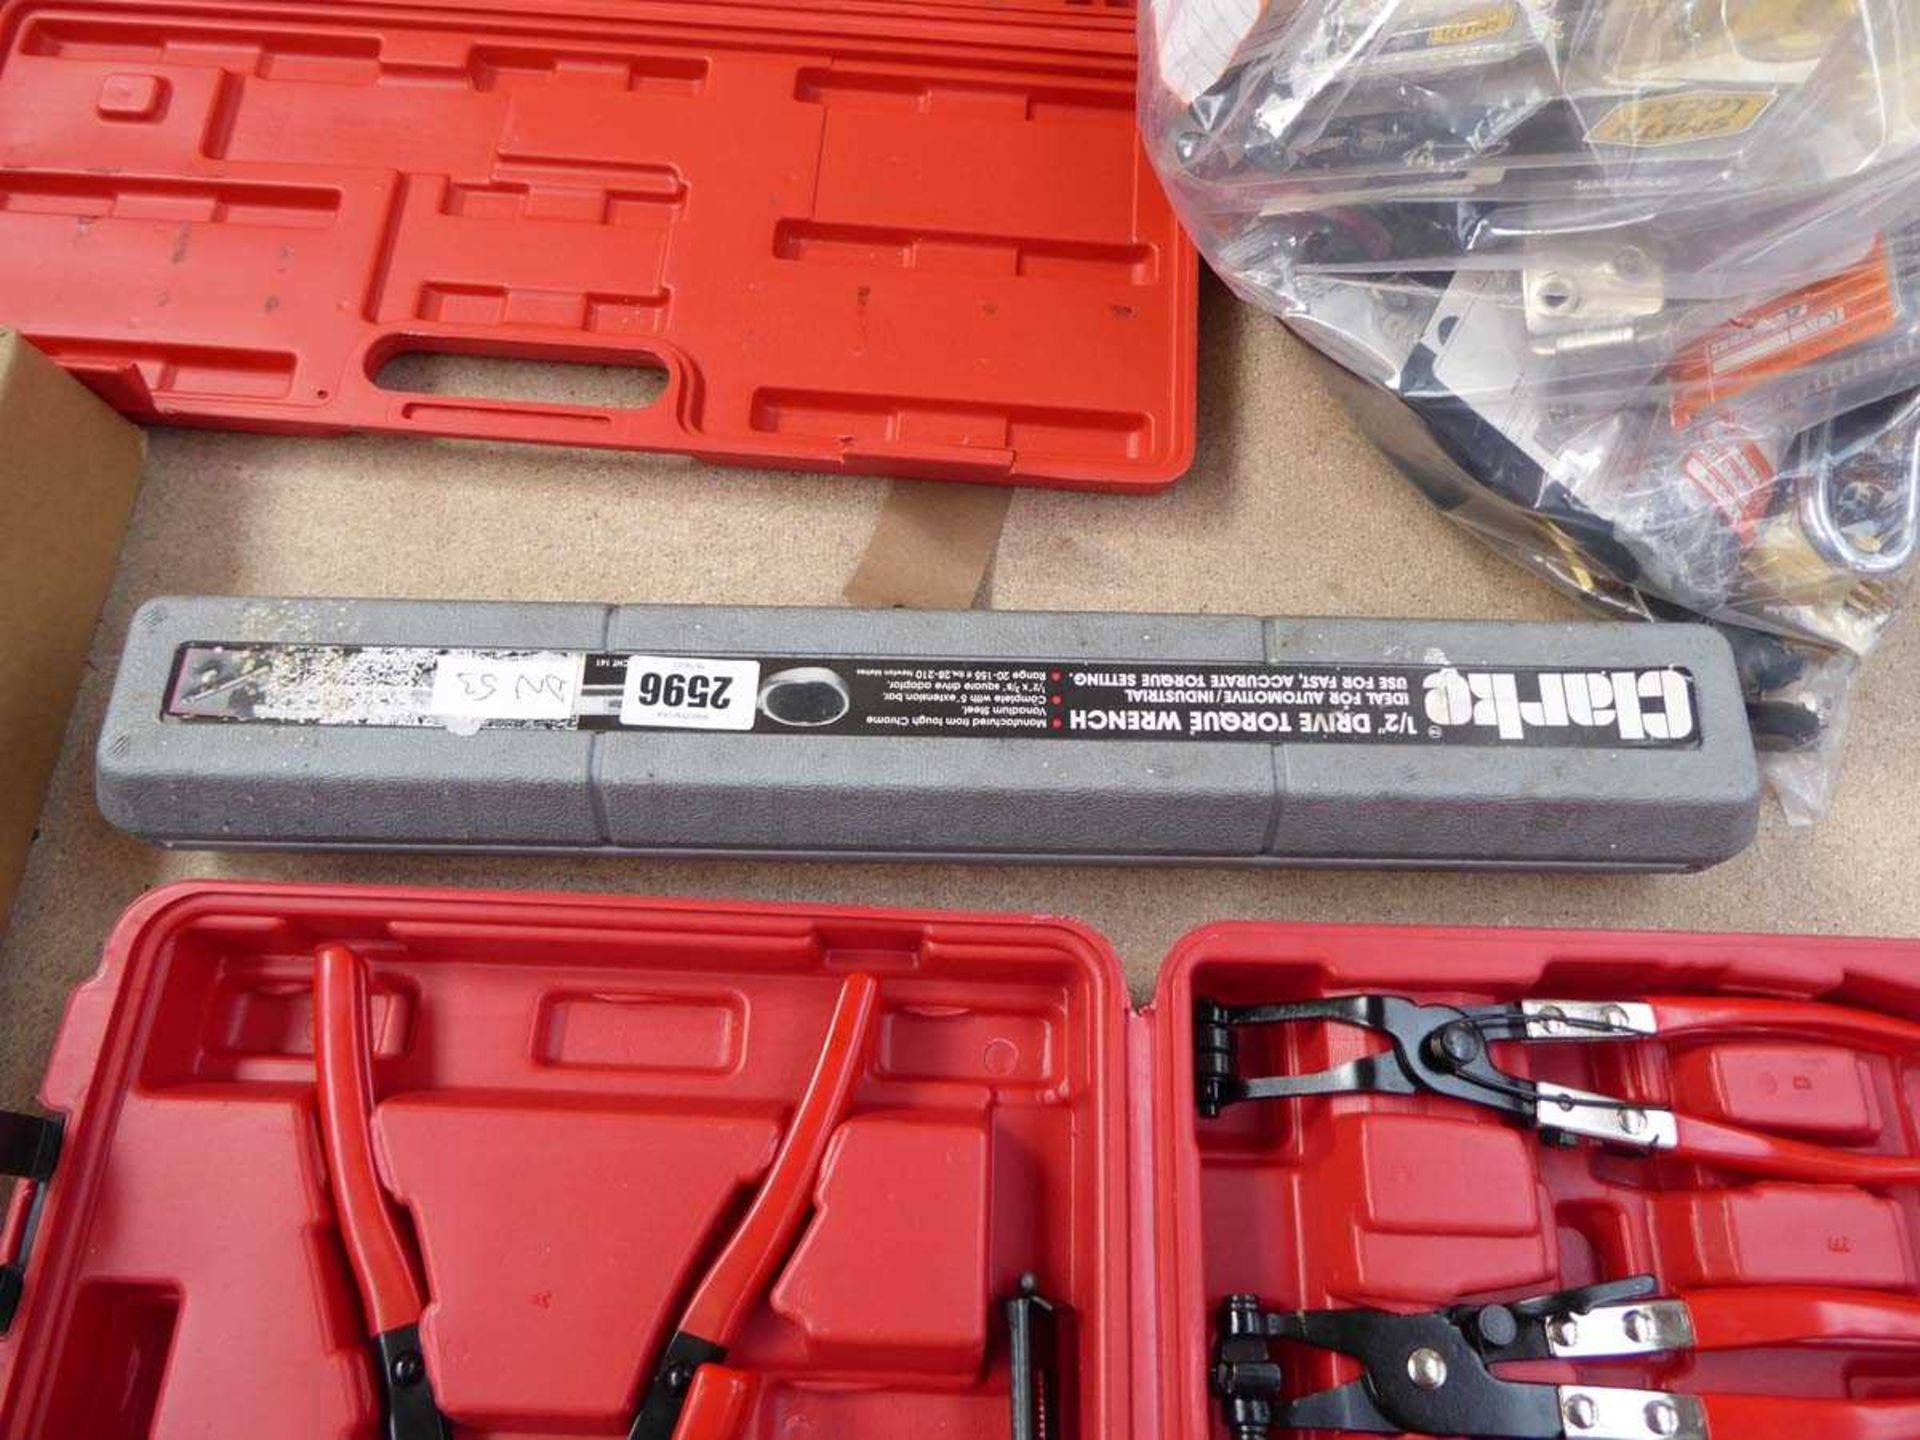 Cased Clarke drive torque wrench